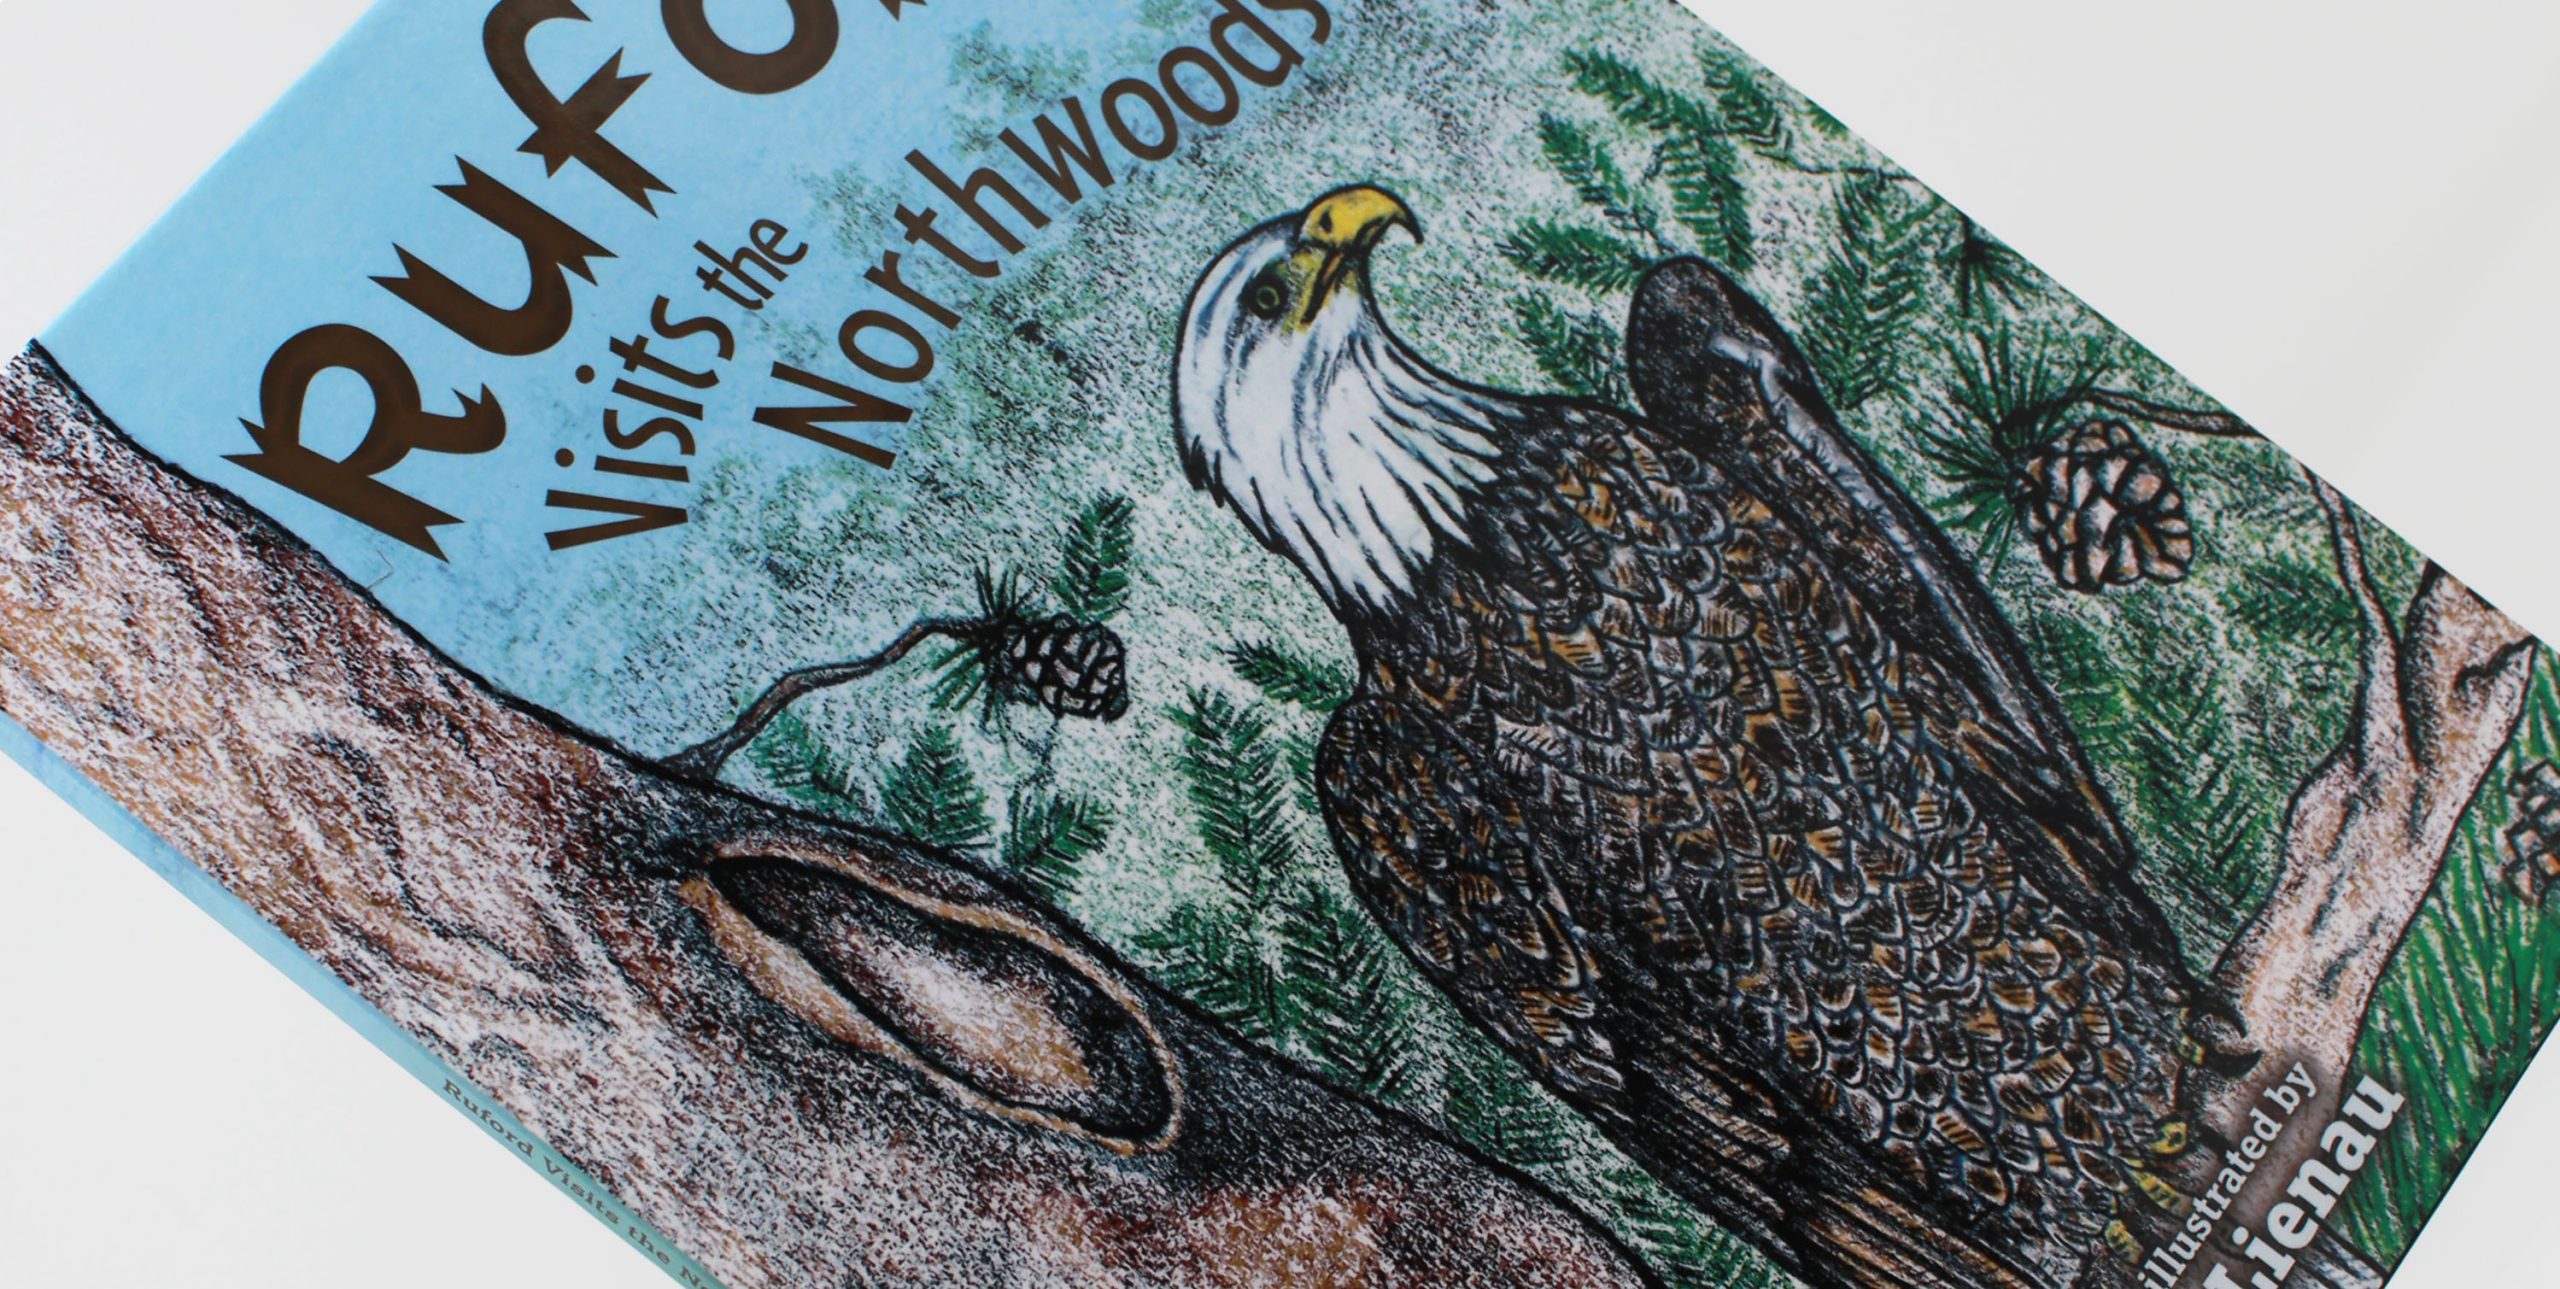 Ruford Visits the Northwoods book cover